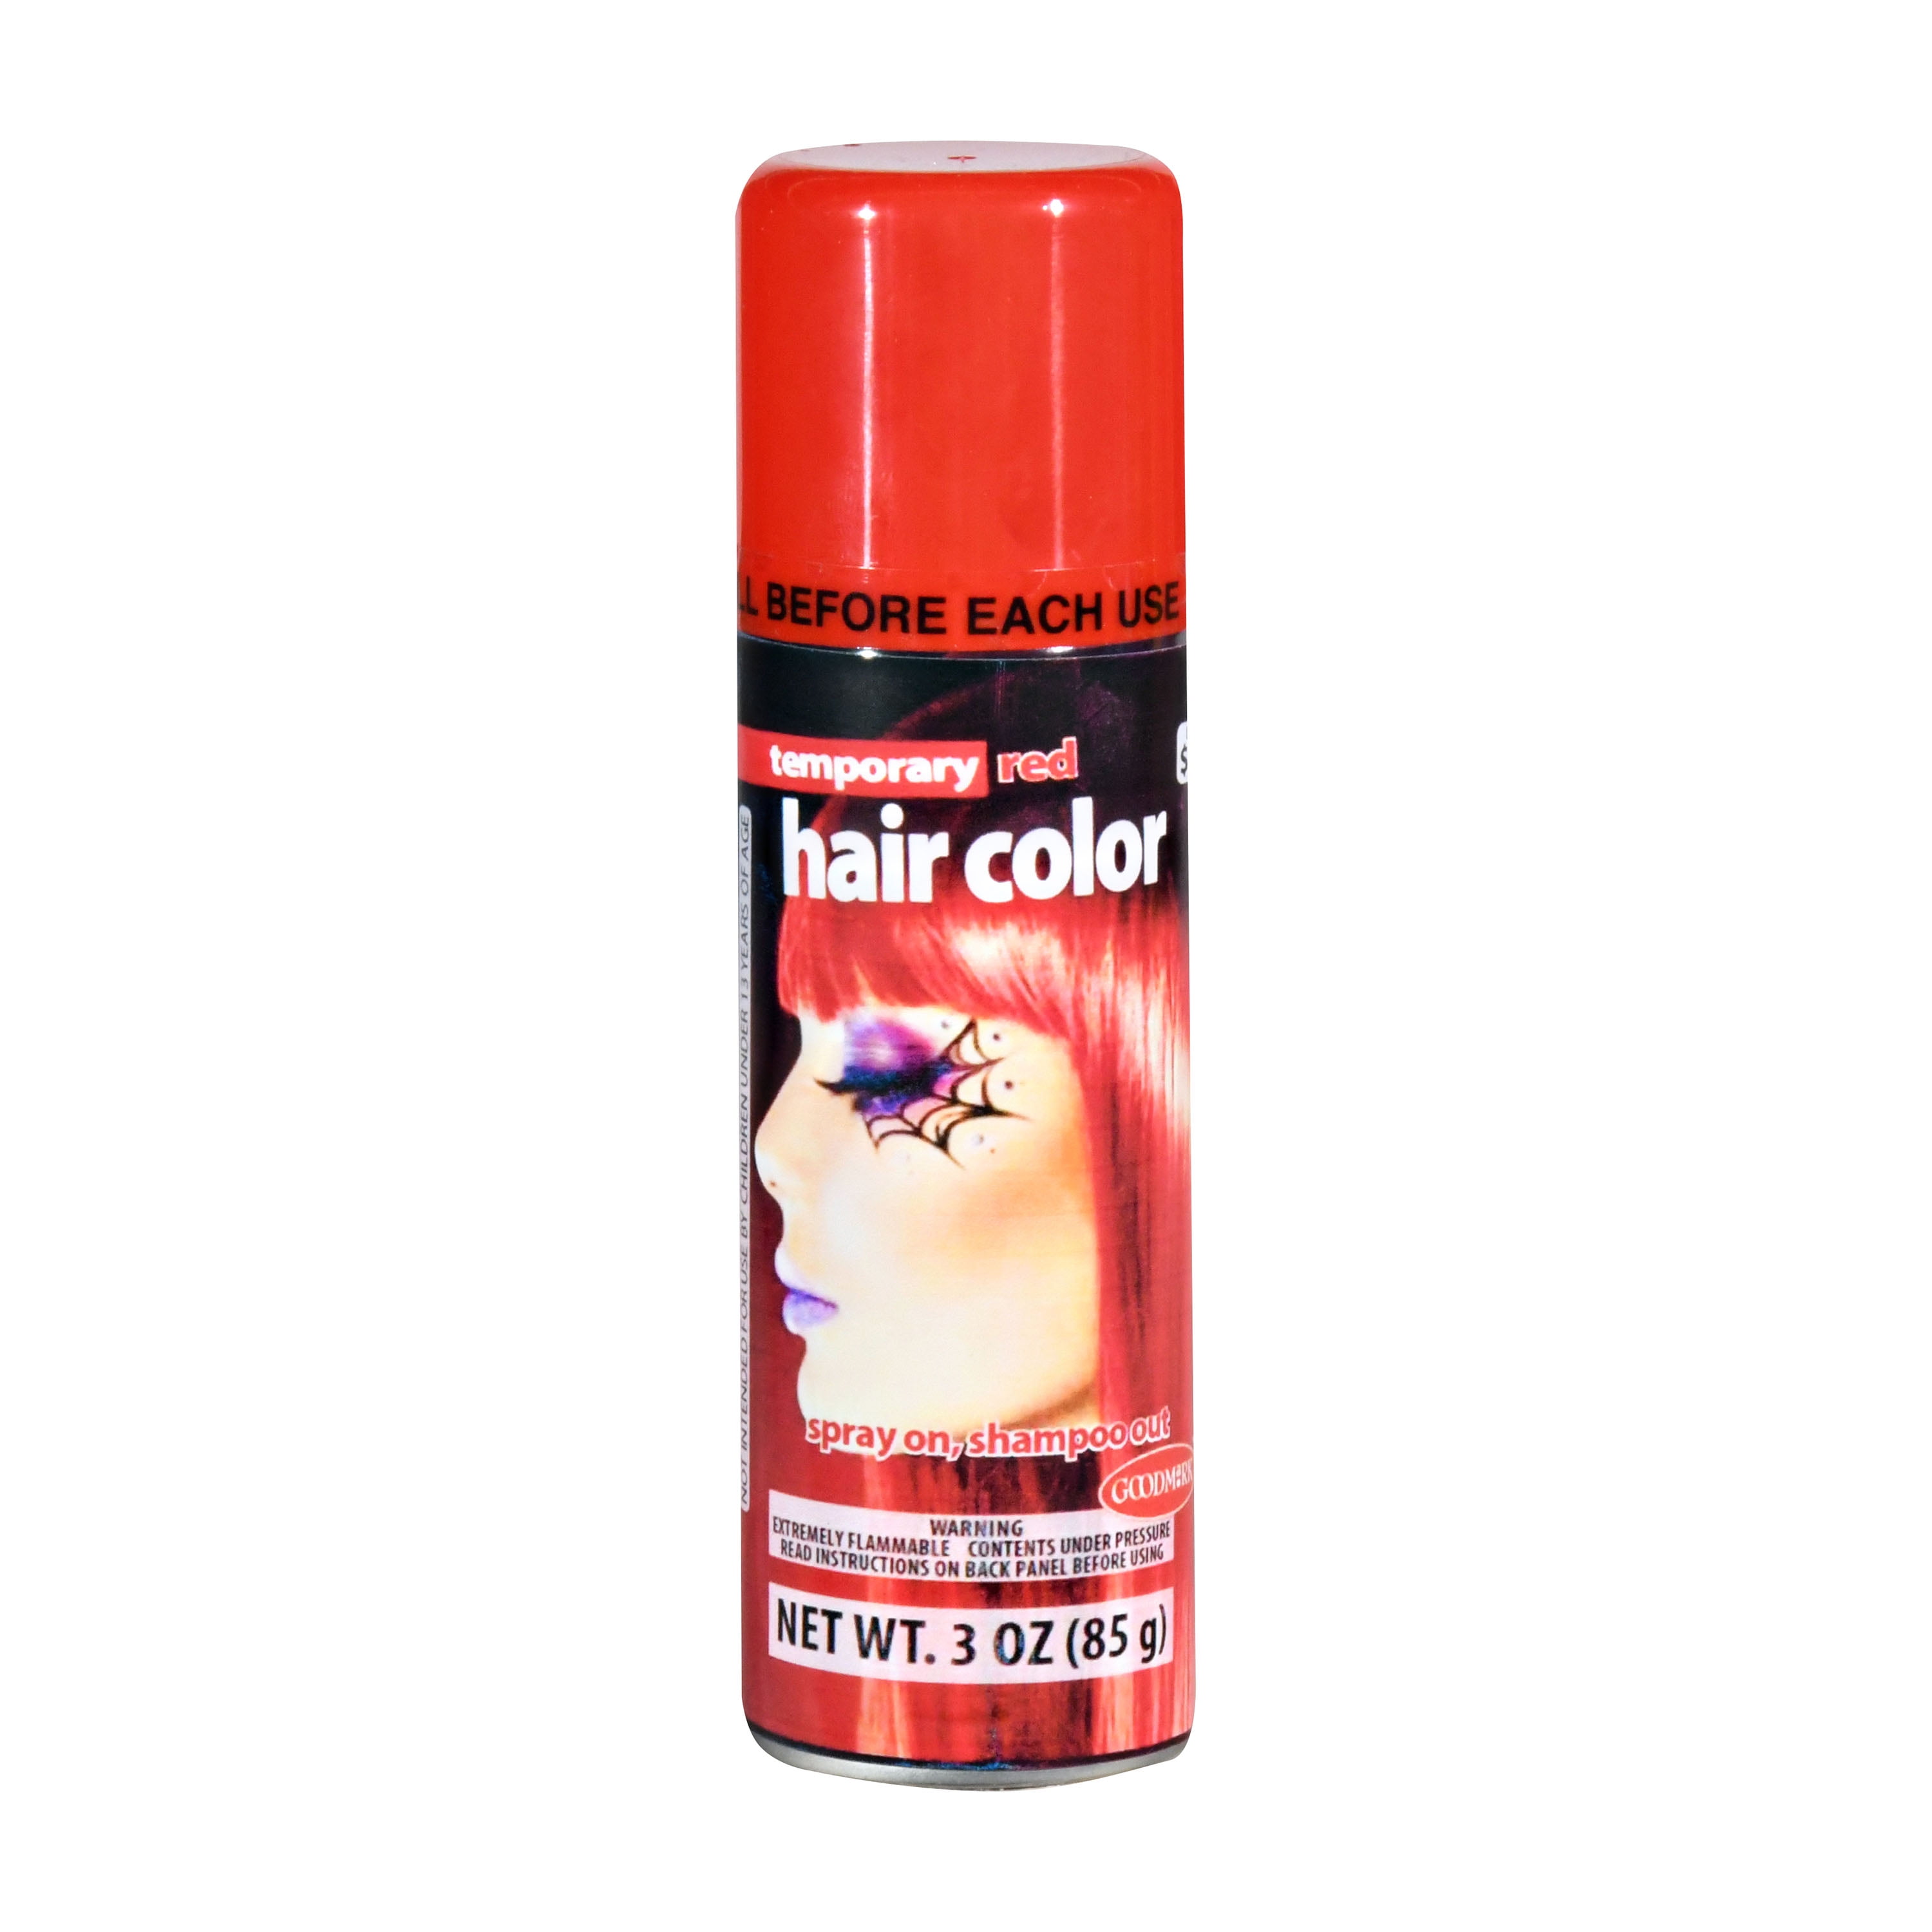 Goodmark Halloween Temporary Hair Color Spray, Net Wt. 3oz (85g) is perfect  when you want to create a fun new look. Choose from a variety of colors  (colors sold separately). Hair color